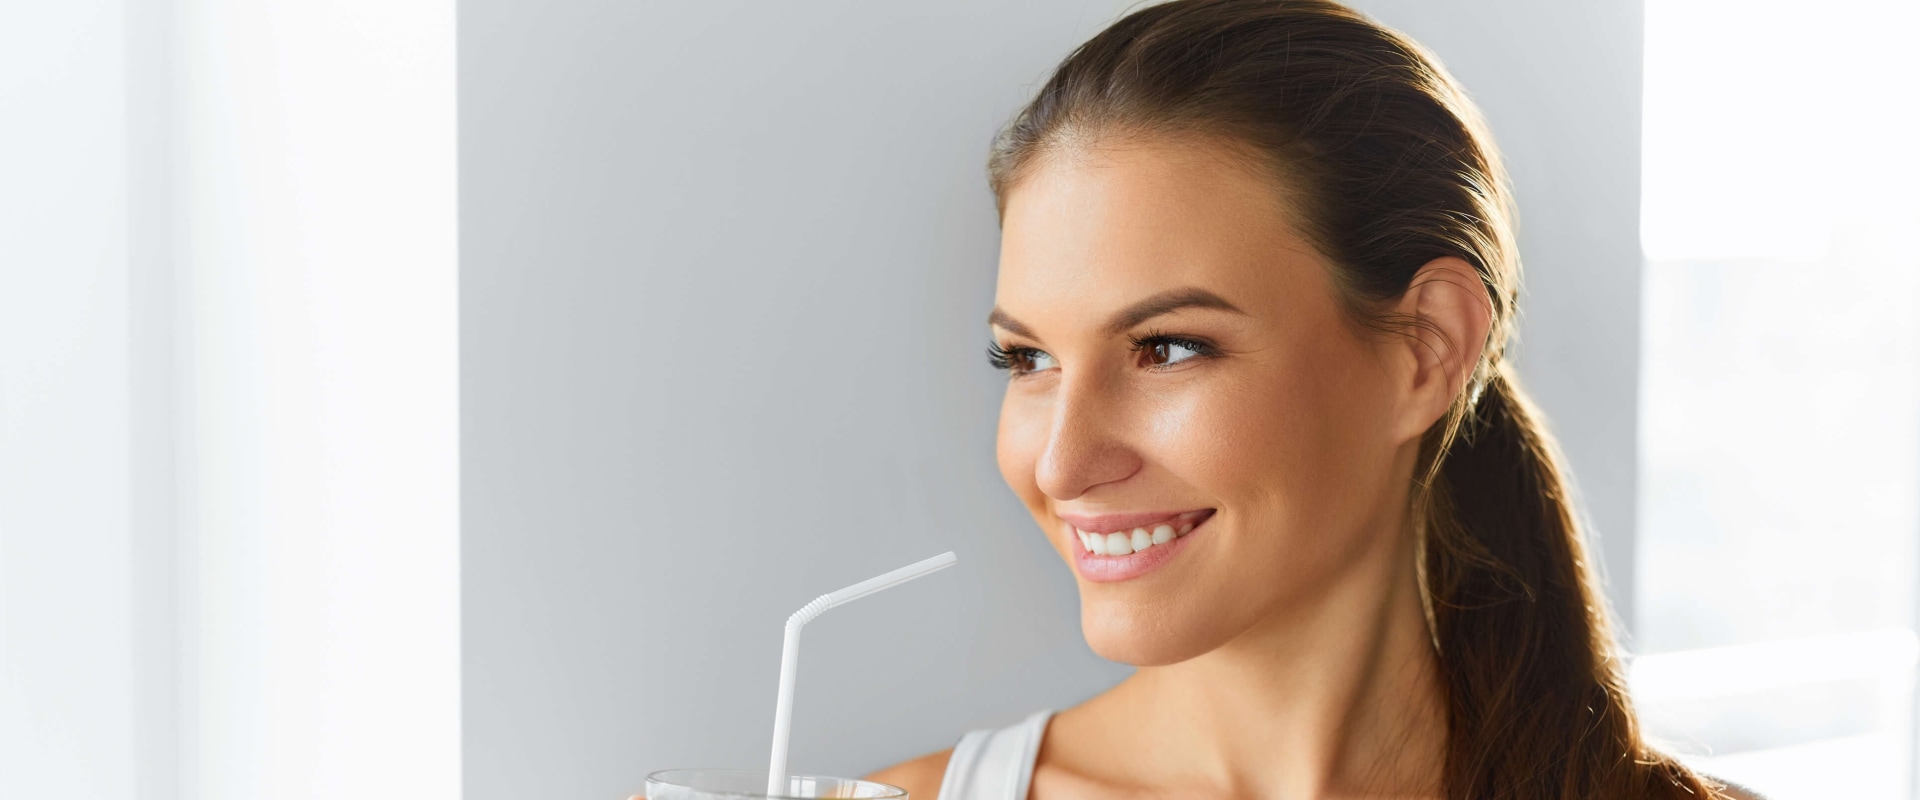 Protecting Your Smile After a Makeover: Foods and Drinks to Avoid